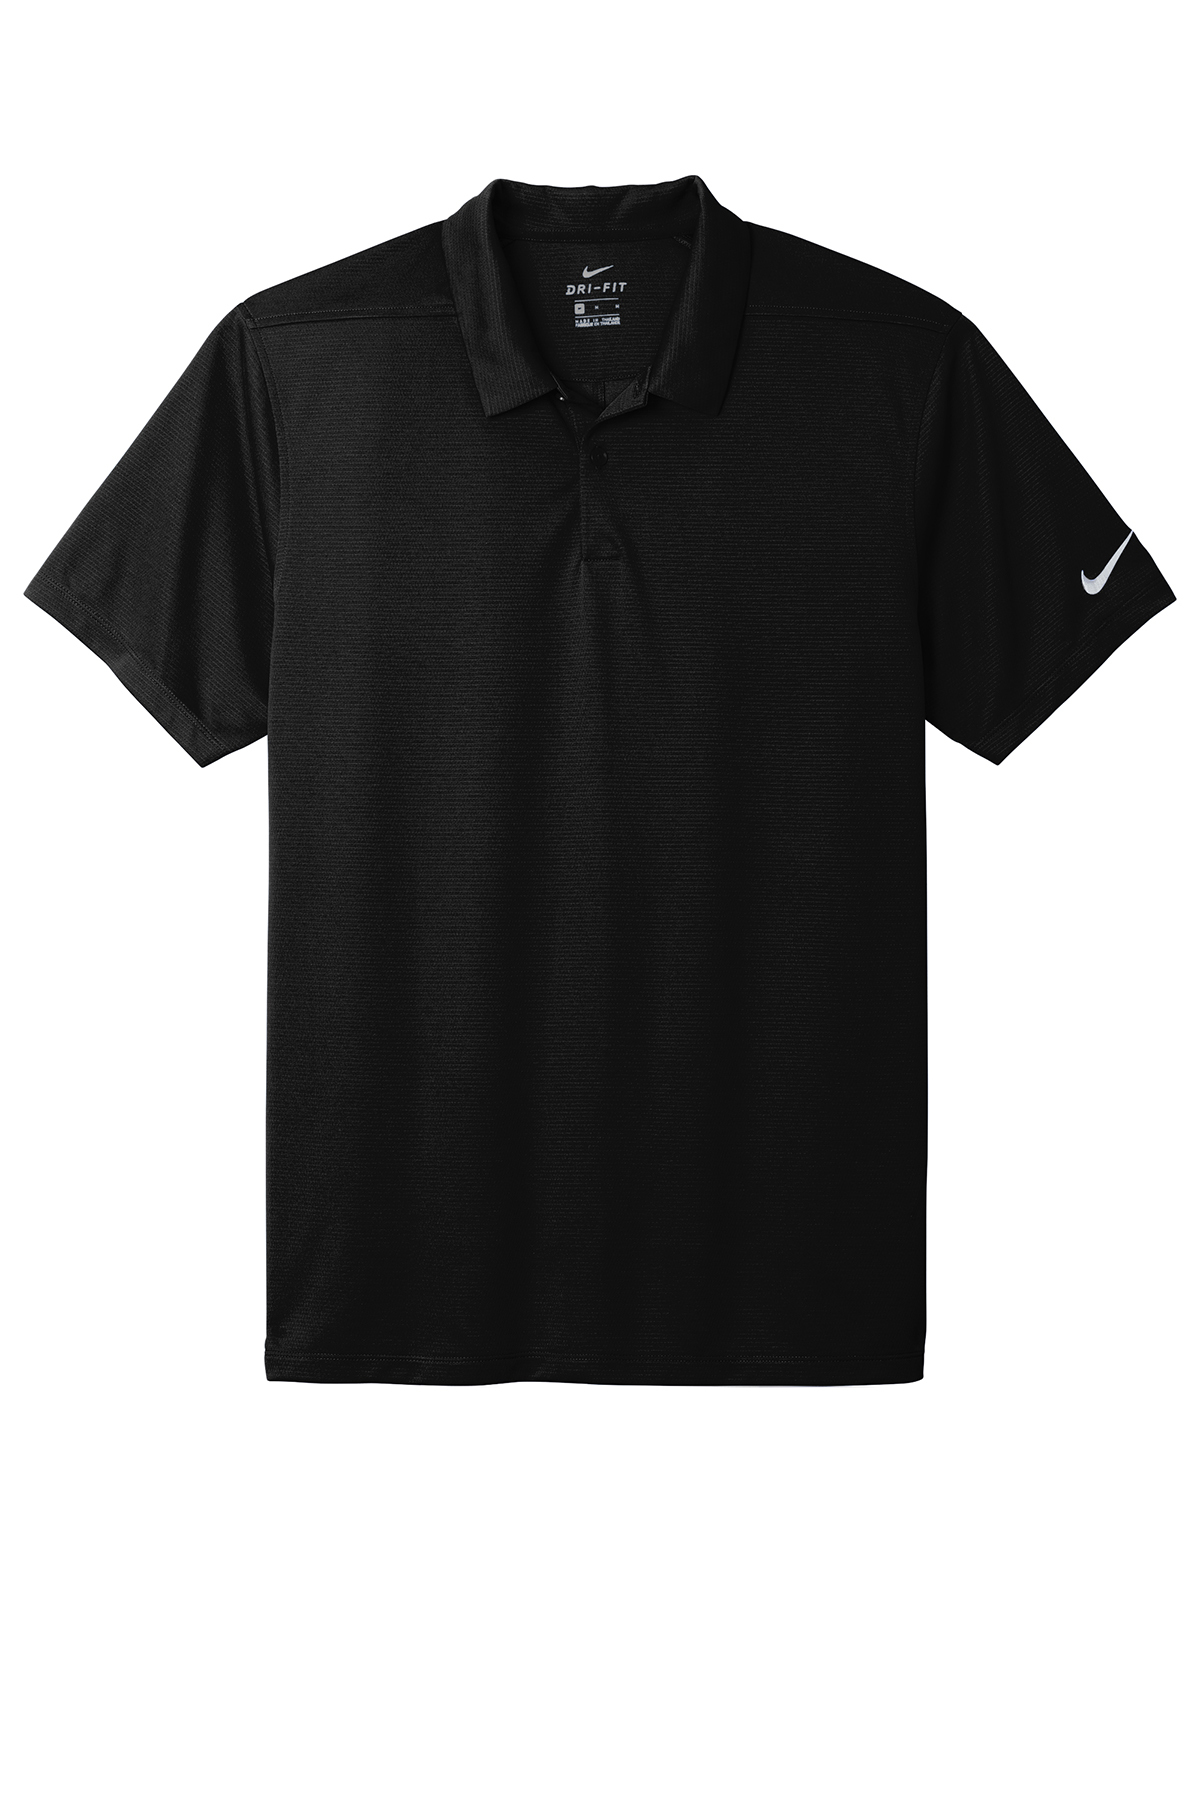 Nike Dry Essential Solid Polo | Product | SanMar